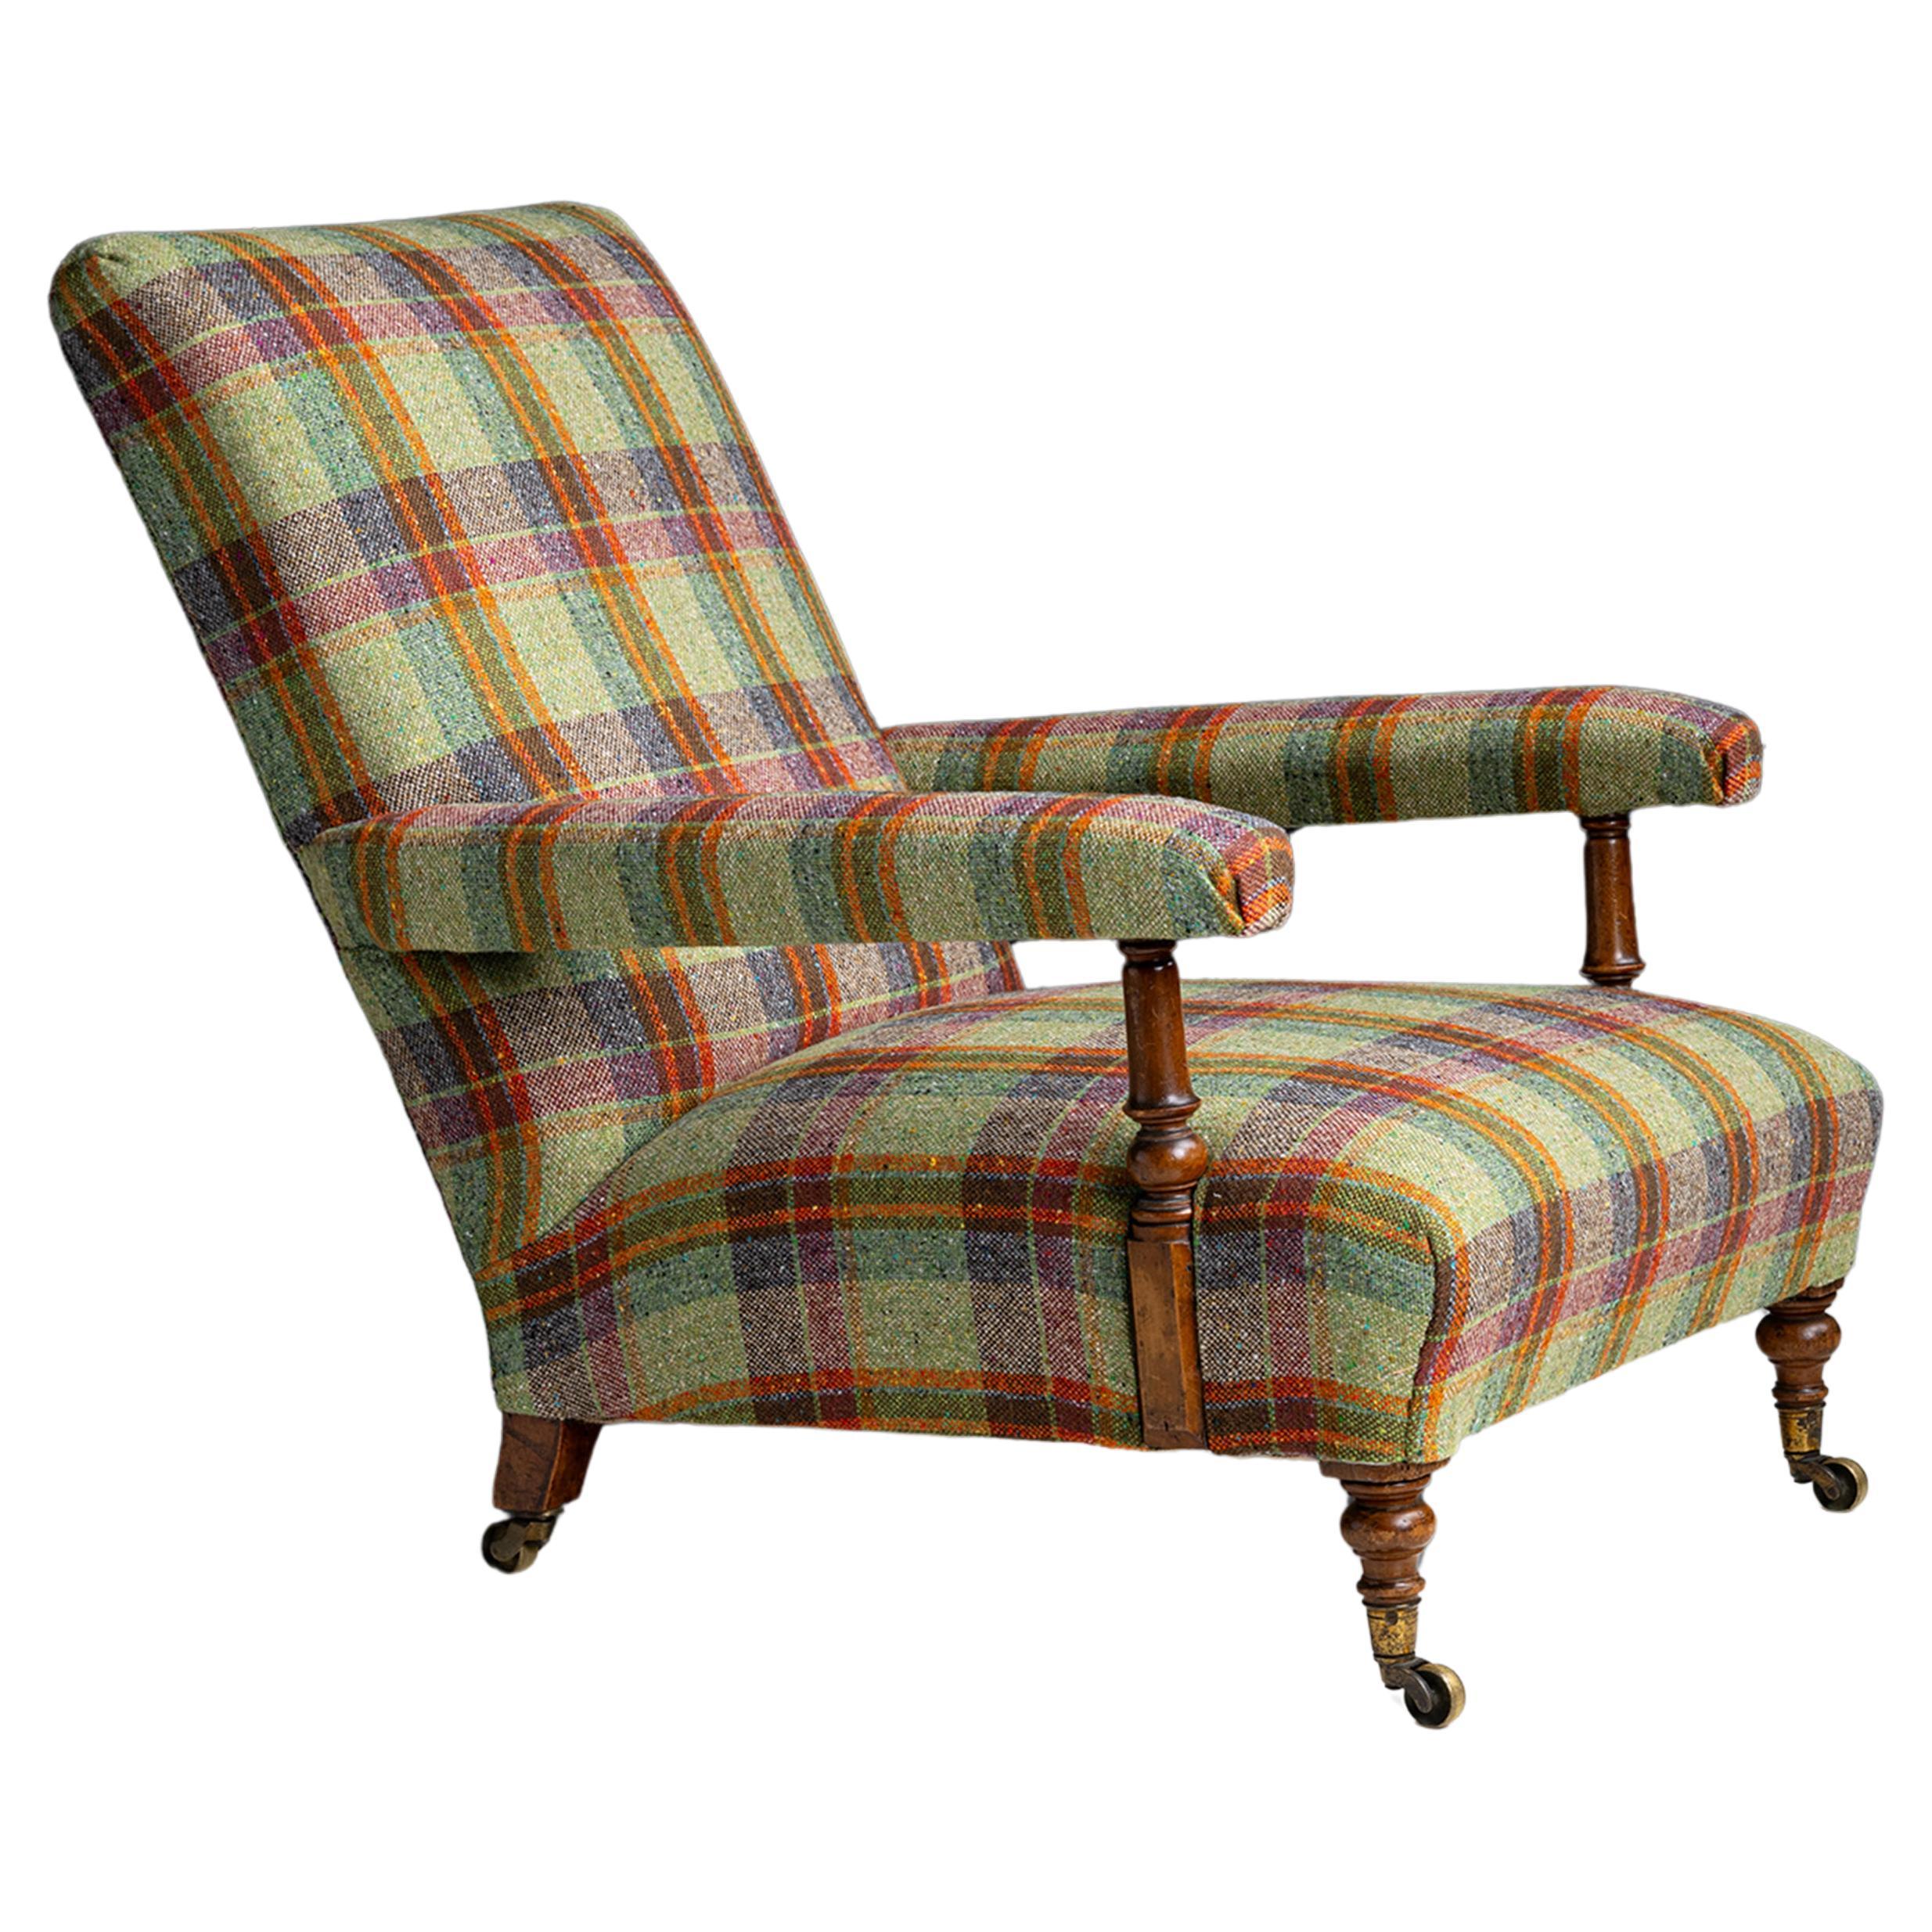 Howard & Sons Armchair in Tweed by Pierre Frey, England 1871 For Sale